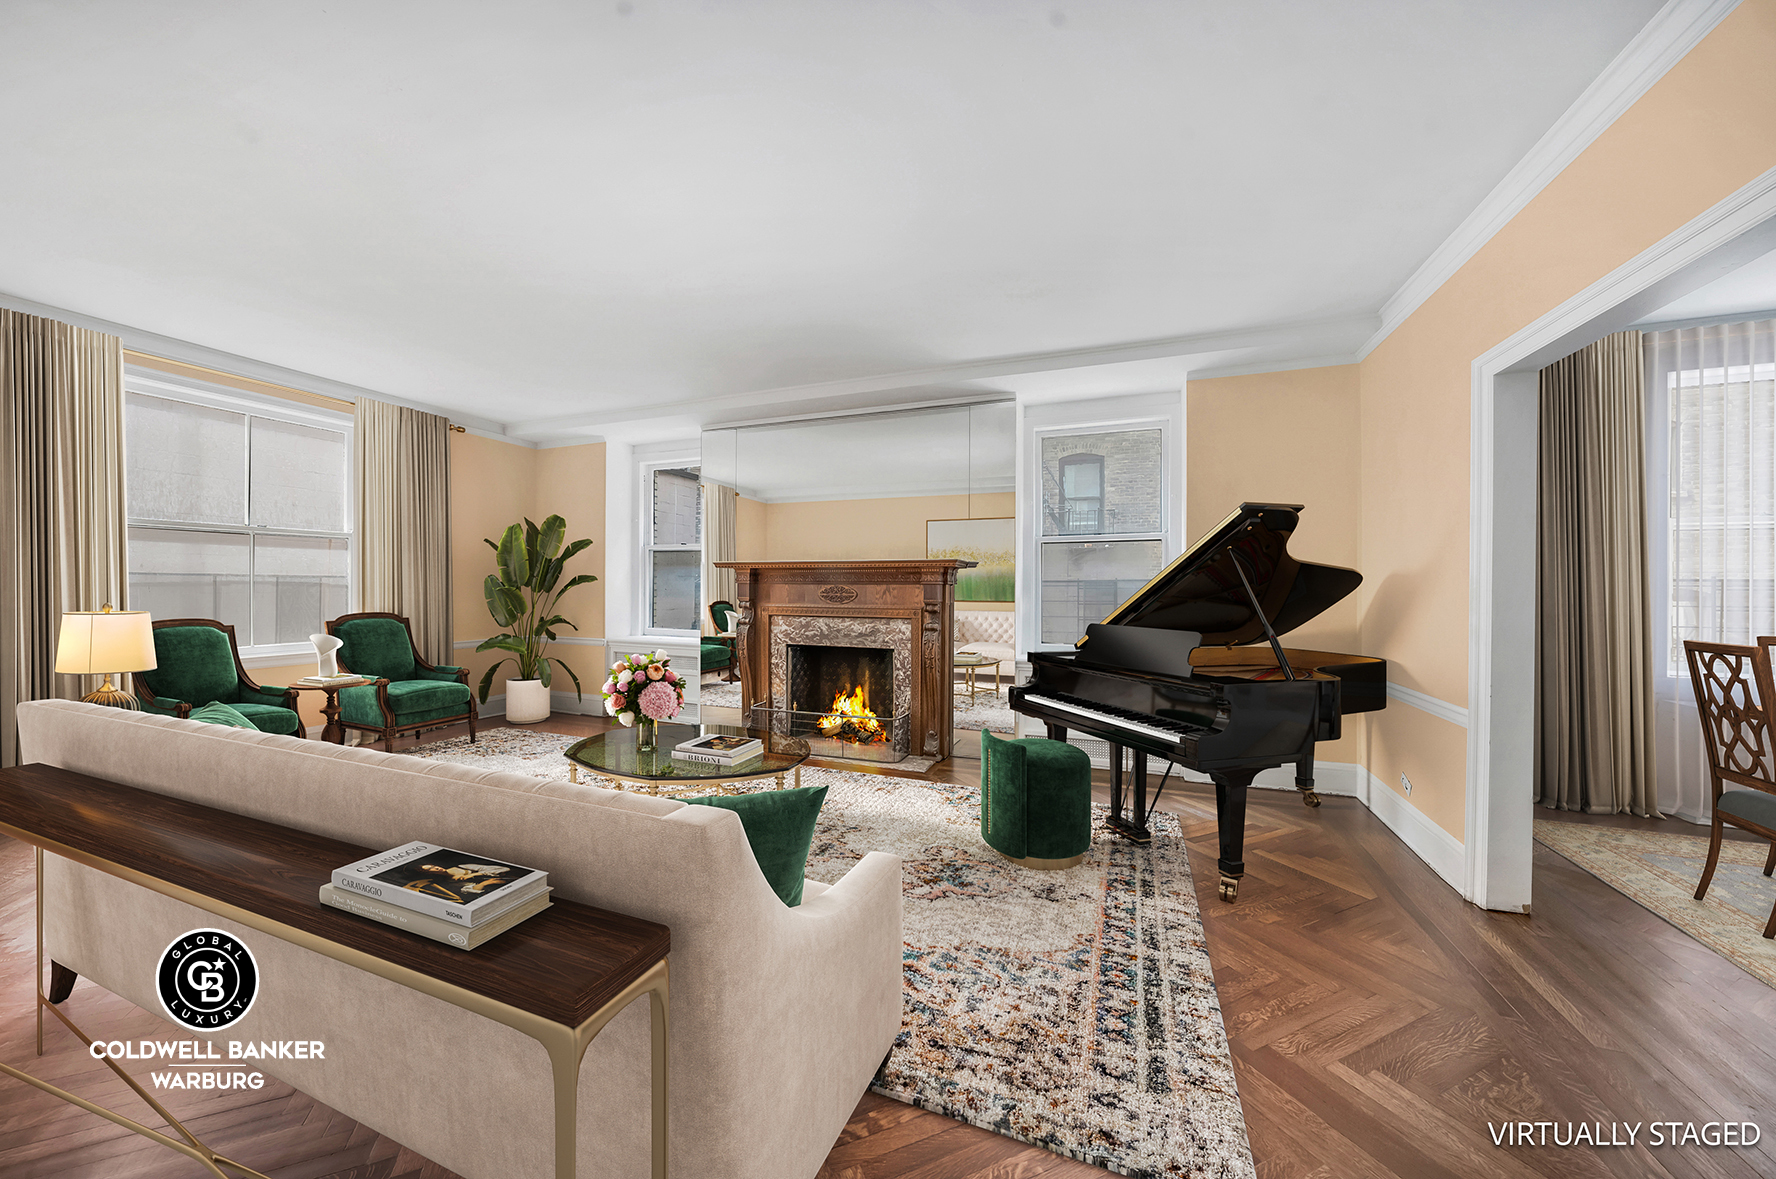 1165 Fifth Avenue 2/3D, Carnegie Hill, Upper East Side, NYC - 4 Bedrooms  
3 Bathrooms  
8 Rooms - 